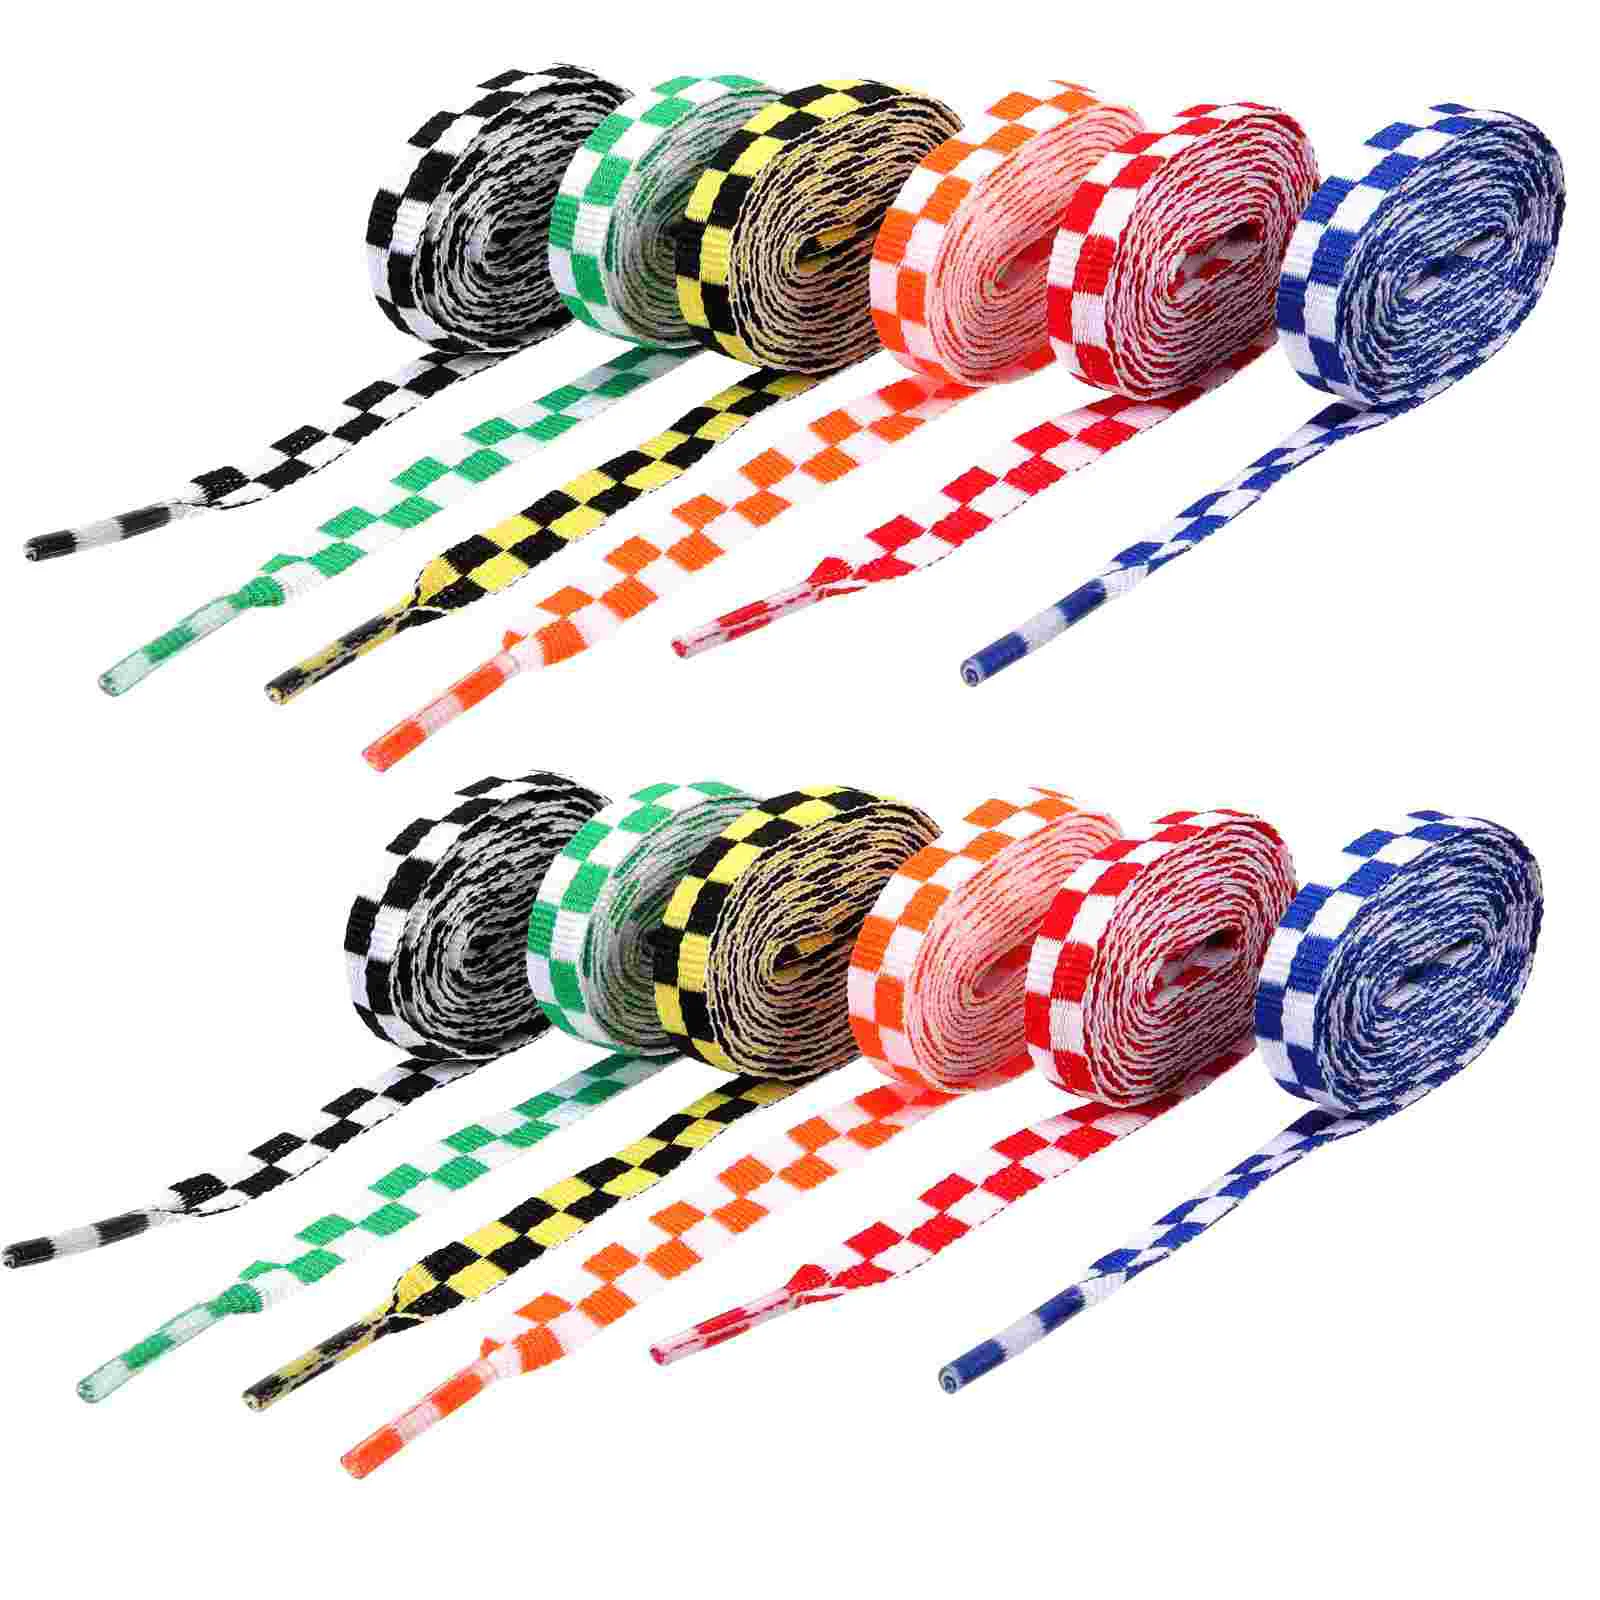 

12 Pairs Shoelace Polyester Shoelaces Accessories Flat Replacement for Sneakers